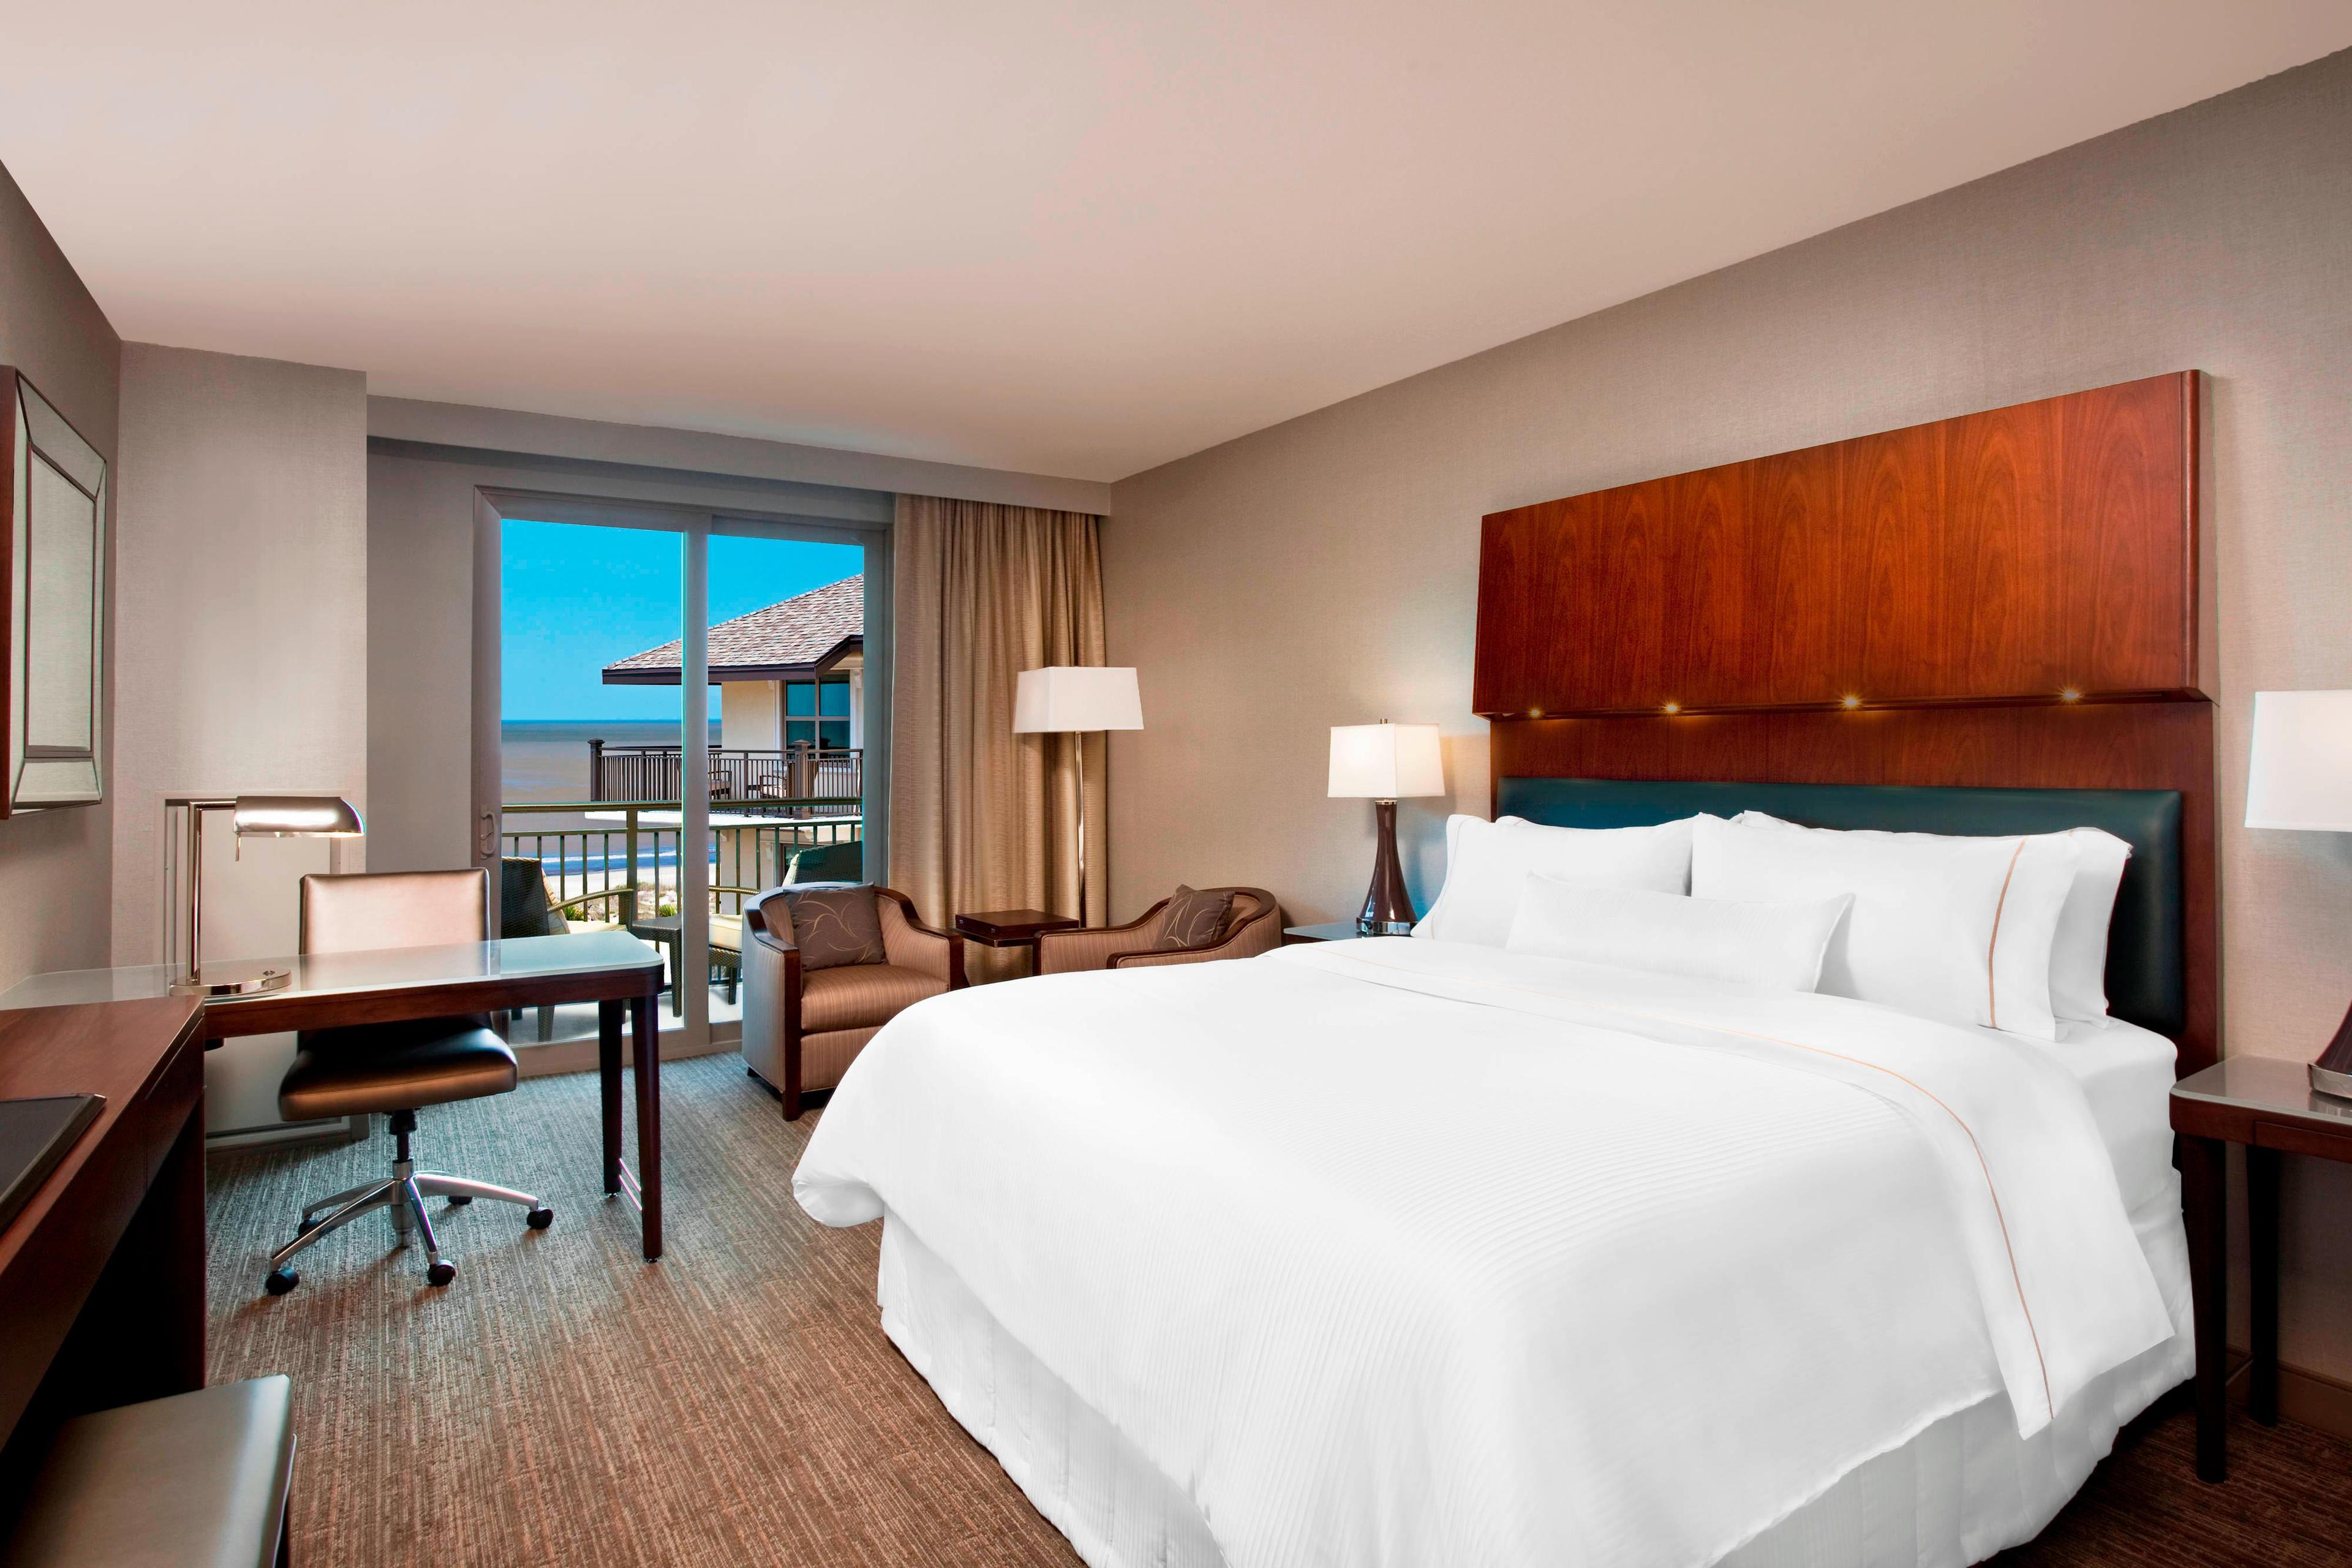 Recharge in our grand deluxe room. Get a sound night's sleep on our incredibly soft beds, enjoy the oceanfront views and connect with work using our ergonomic workstations.